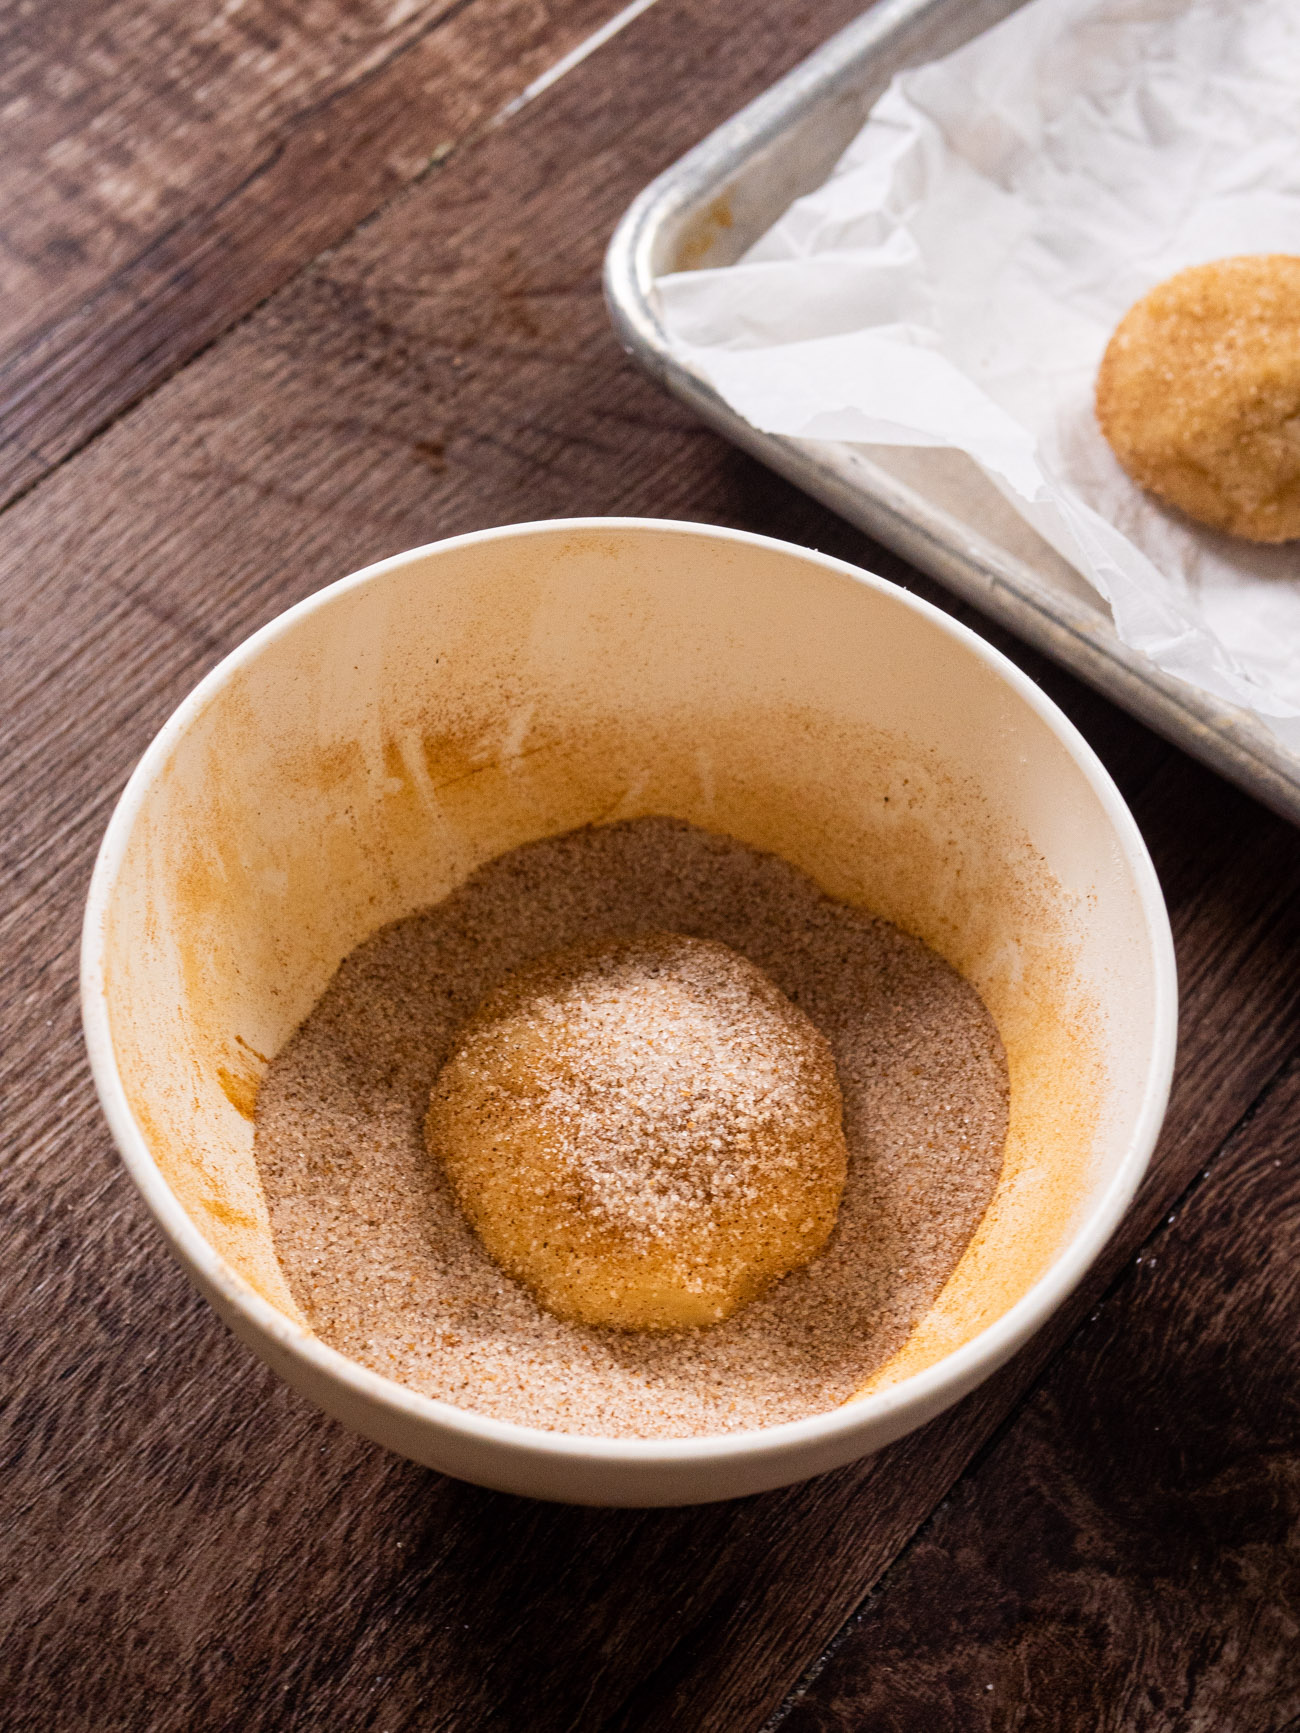 Roll balls in cinnamon sugar, place on a baking tray, and bake on the center rack 11 minutes. They'll look underdone when you take them out, so let them cool about 10 minutes on the baking tray and they will firm up as they cool.